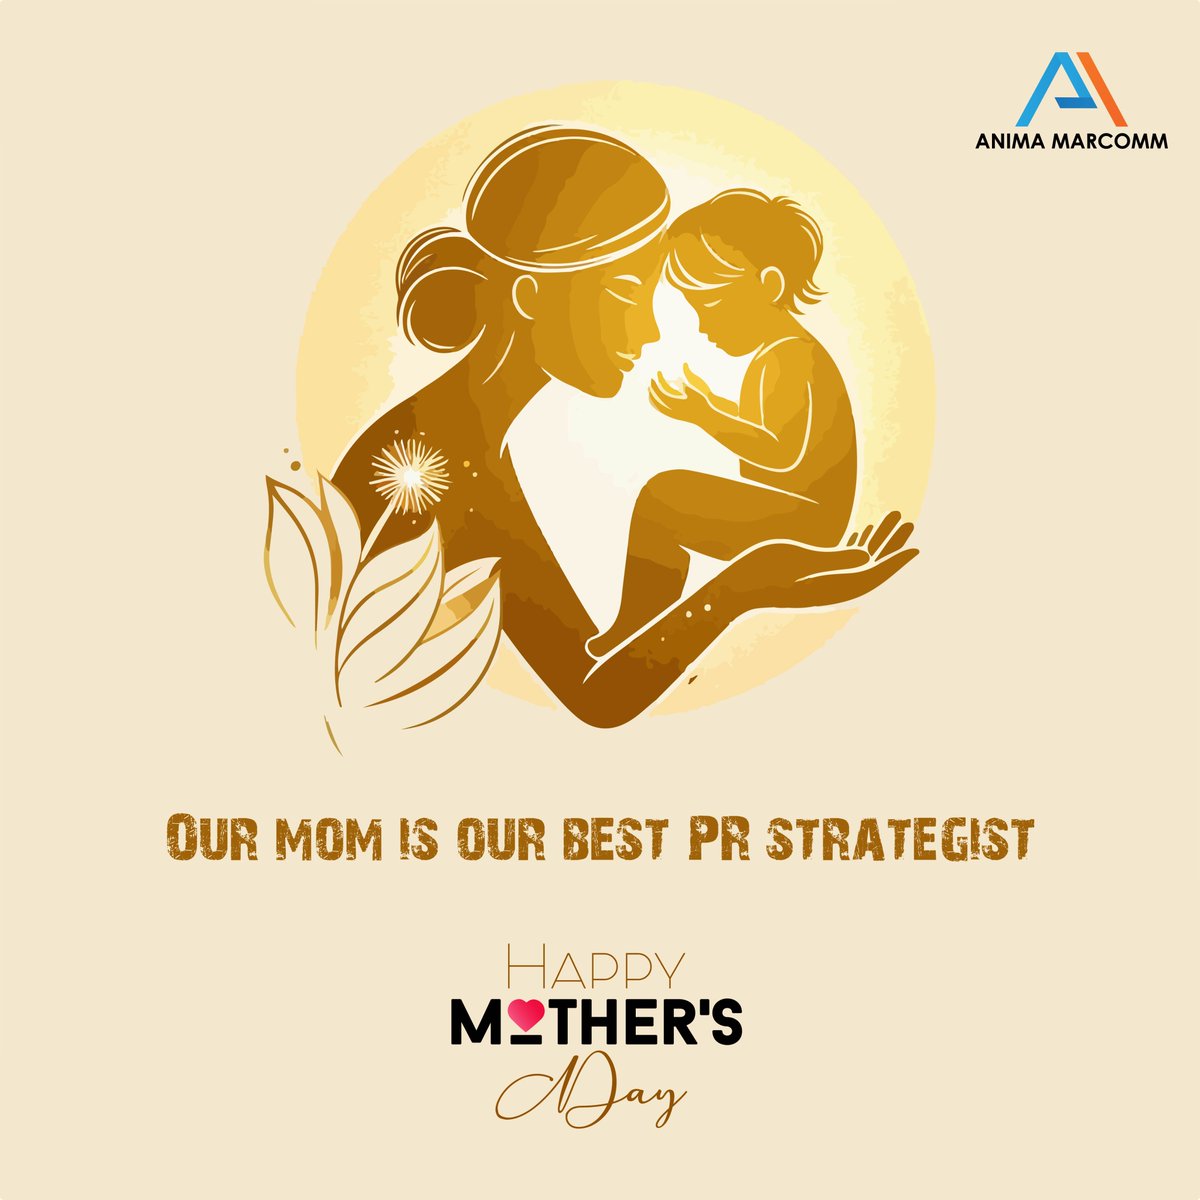 Everything we know about communication, we learnt from her. 

#MothersDay #mothersday2024 #MothersDayWeekend #PublicRelations #branding